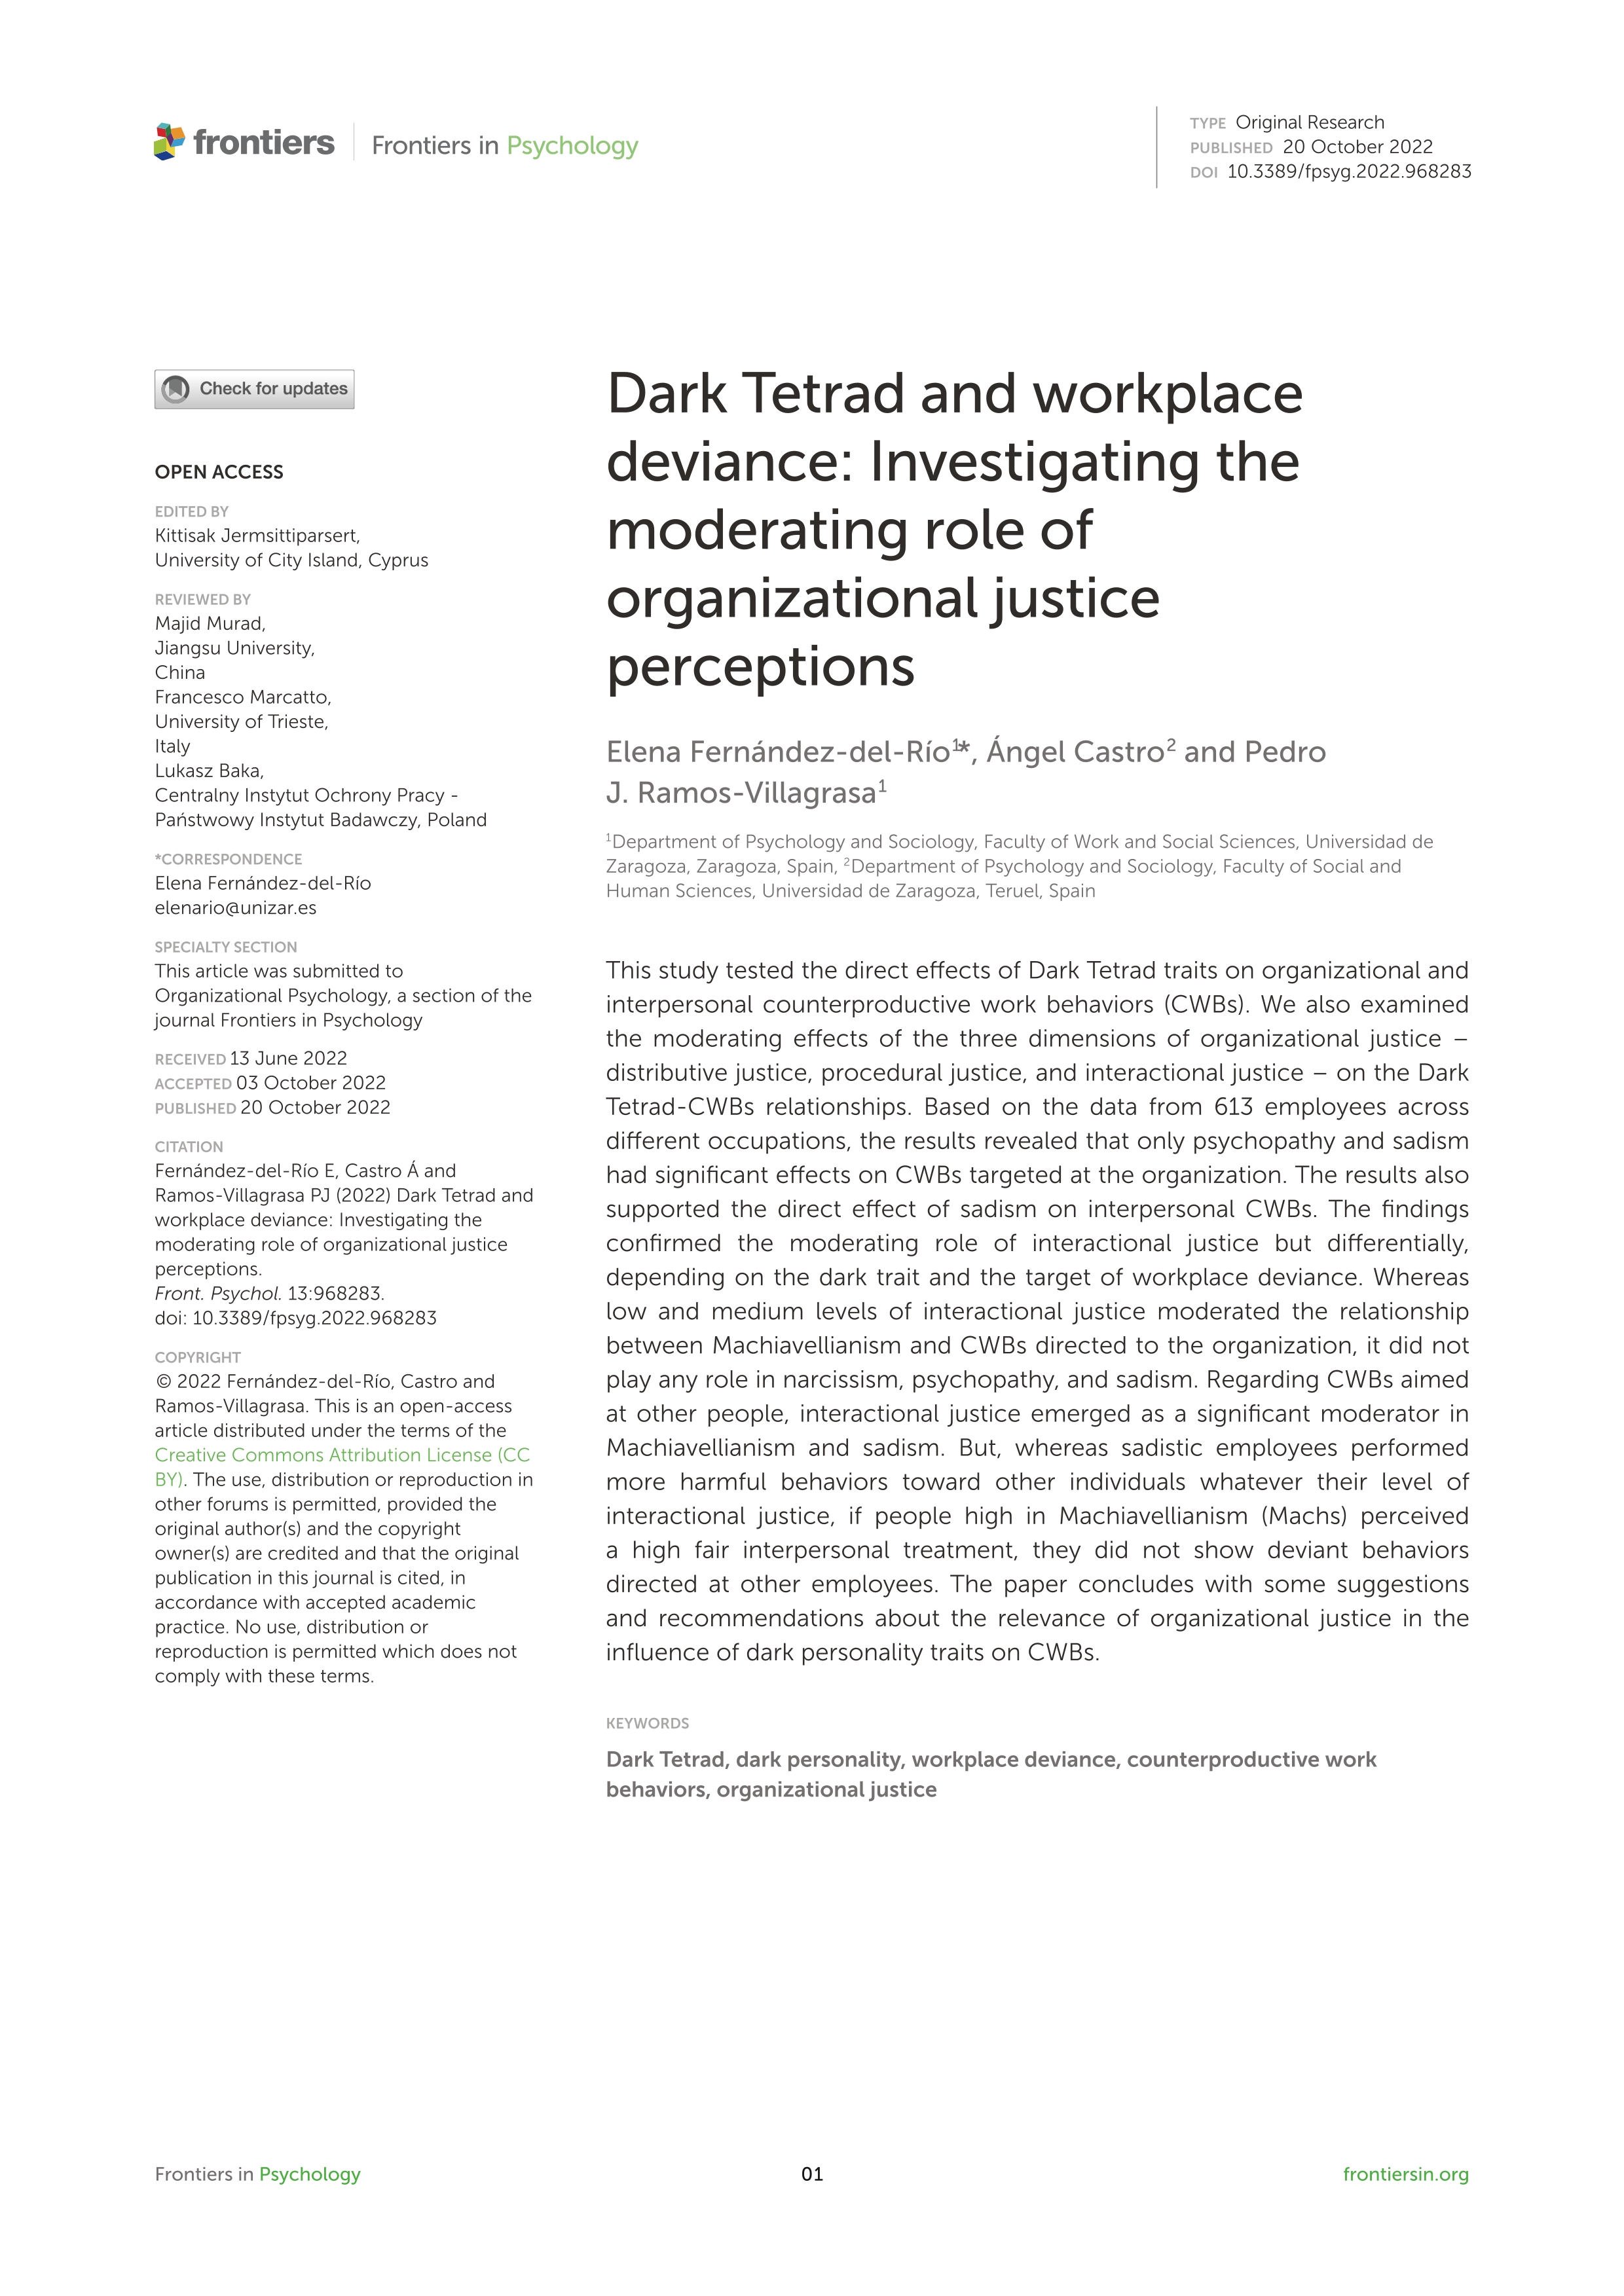 Dark Tetrad and workplace deviance: Investigating the moderating role of organizational justice perceptions